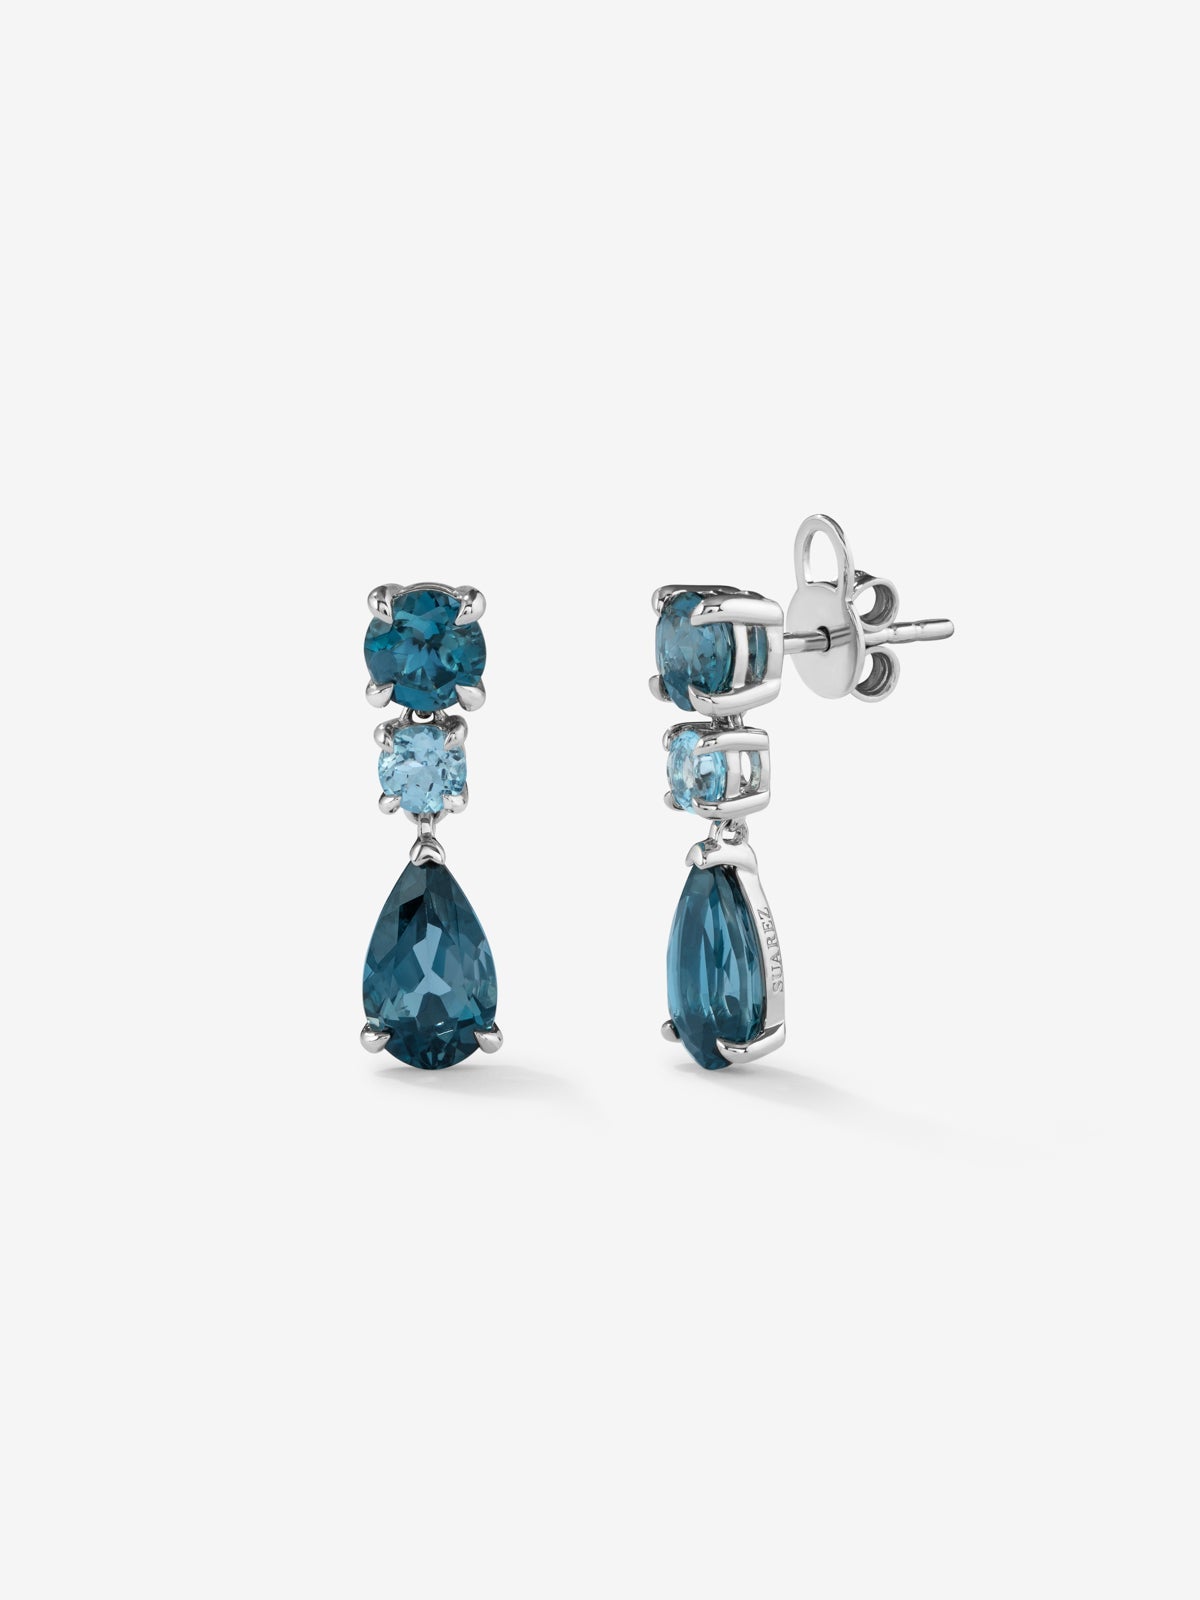 925 silver earrings with pear-cut London blue topazes of 2.56 cts and brilliant cut of 1.4 cts, and Swiss blue topazes in brilliant cut of 0.57 cts